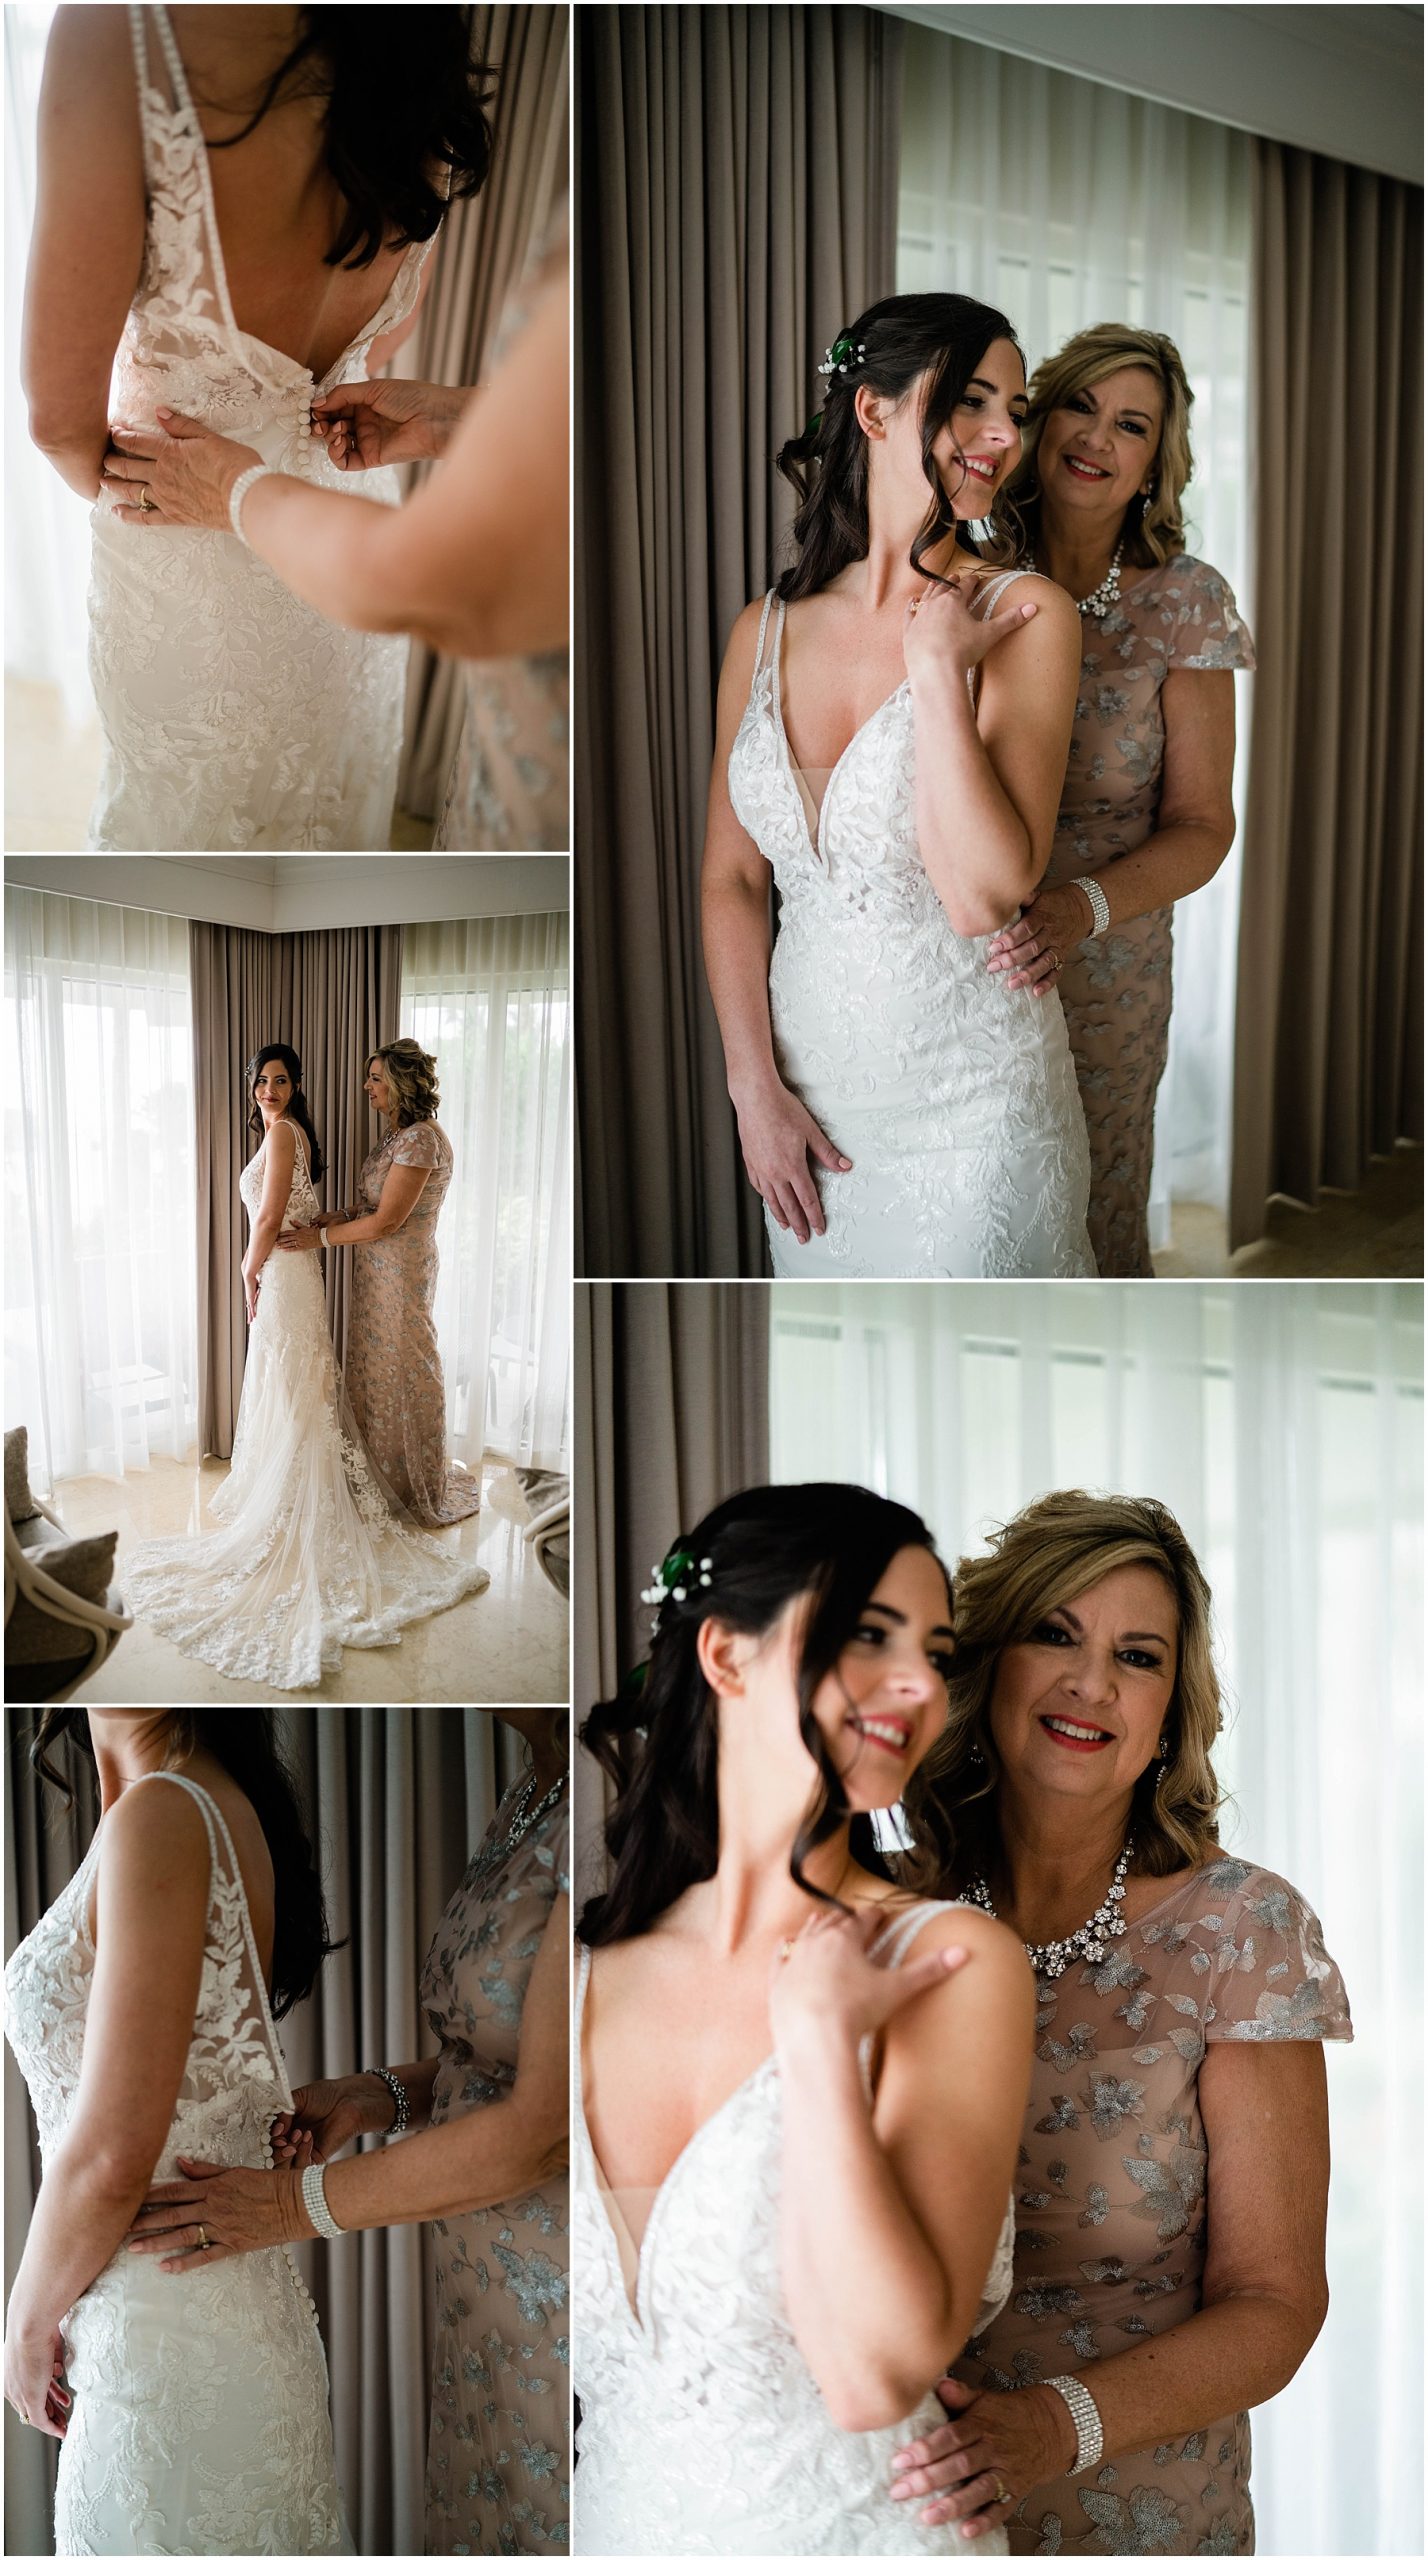 Mother of the bride zips bride's wedding gown on wedding day at JW Marriott Marco Island in Florida.